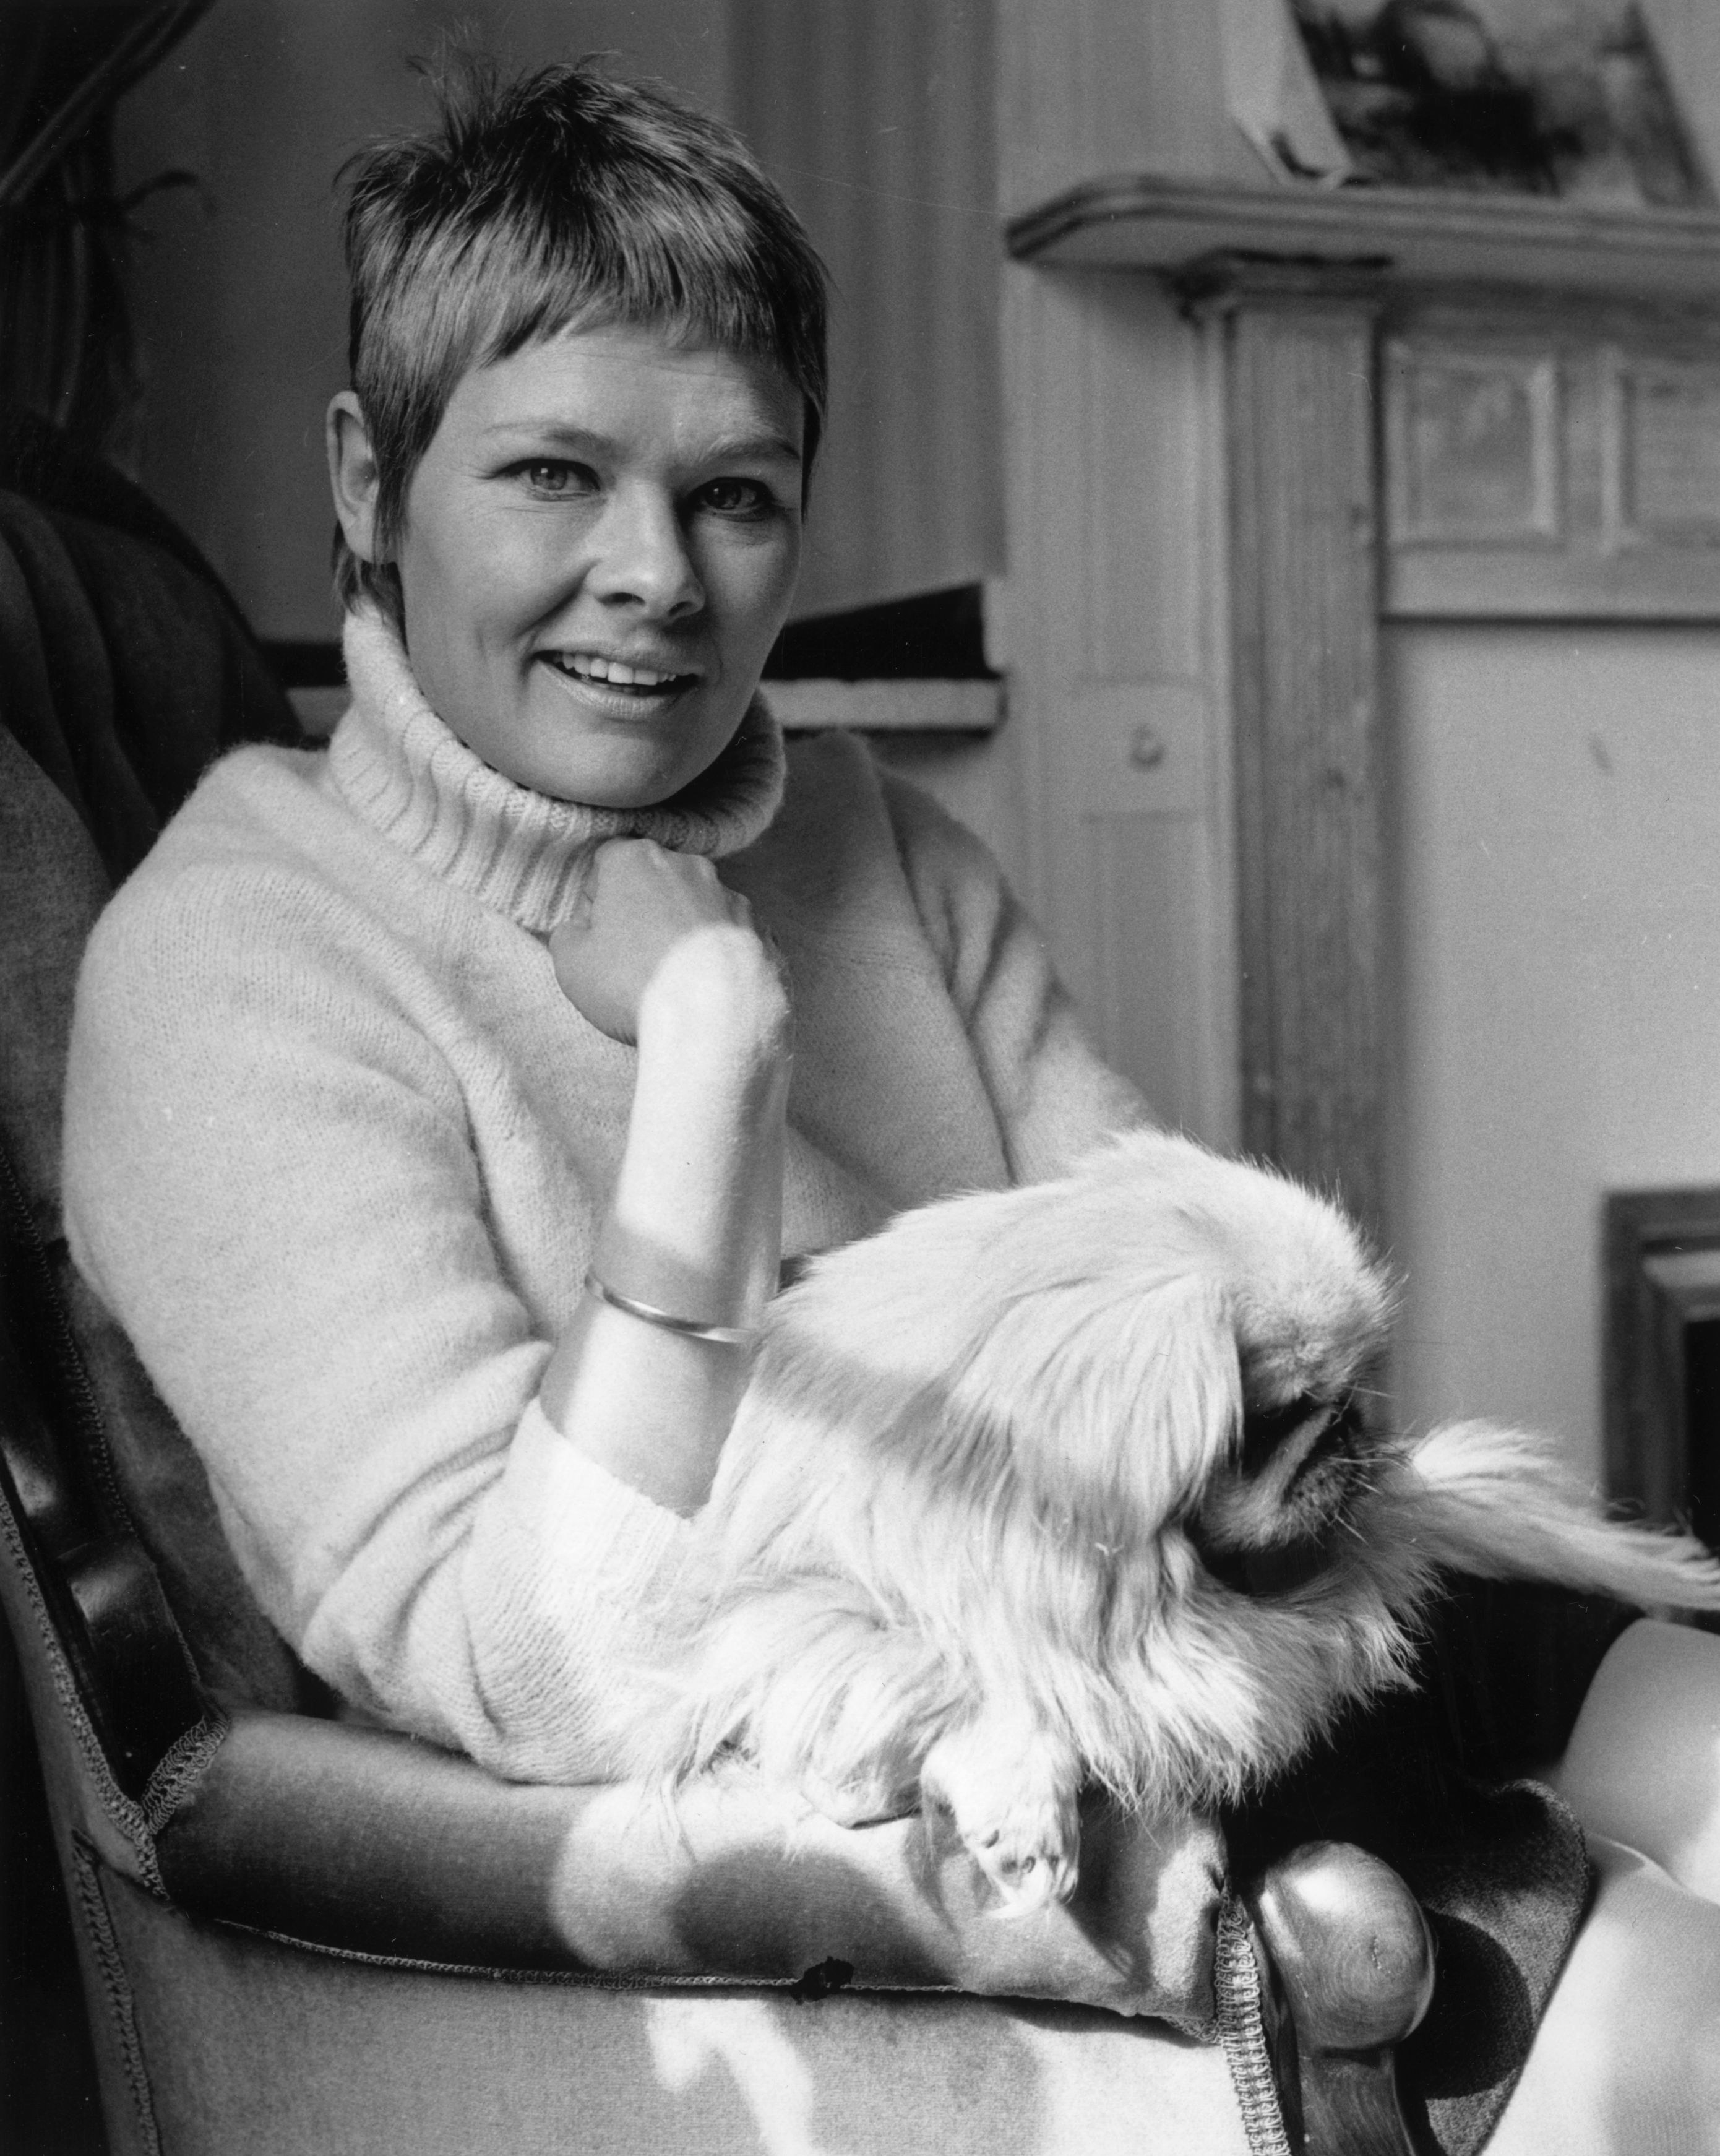 Judi in a turtleneck sweater with a dog in her lap